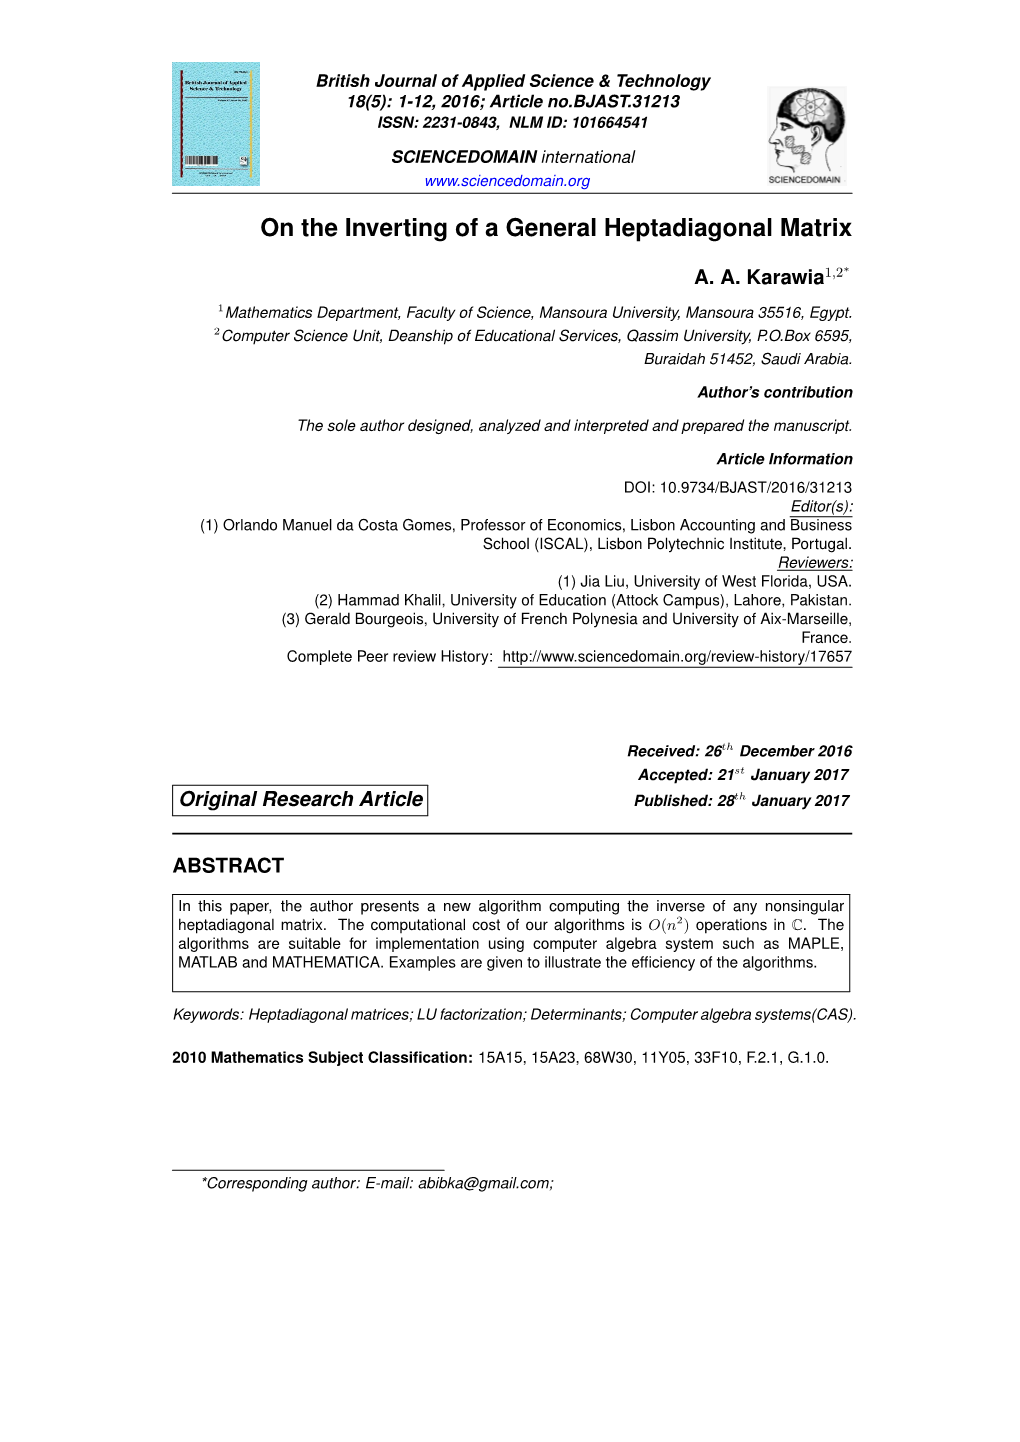 On the Inverting of a General Heptadiagonal Matrix